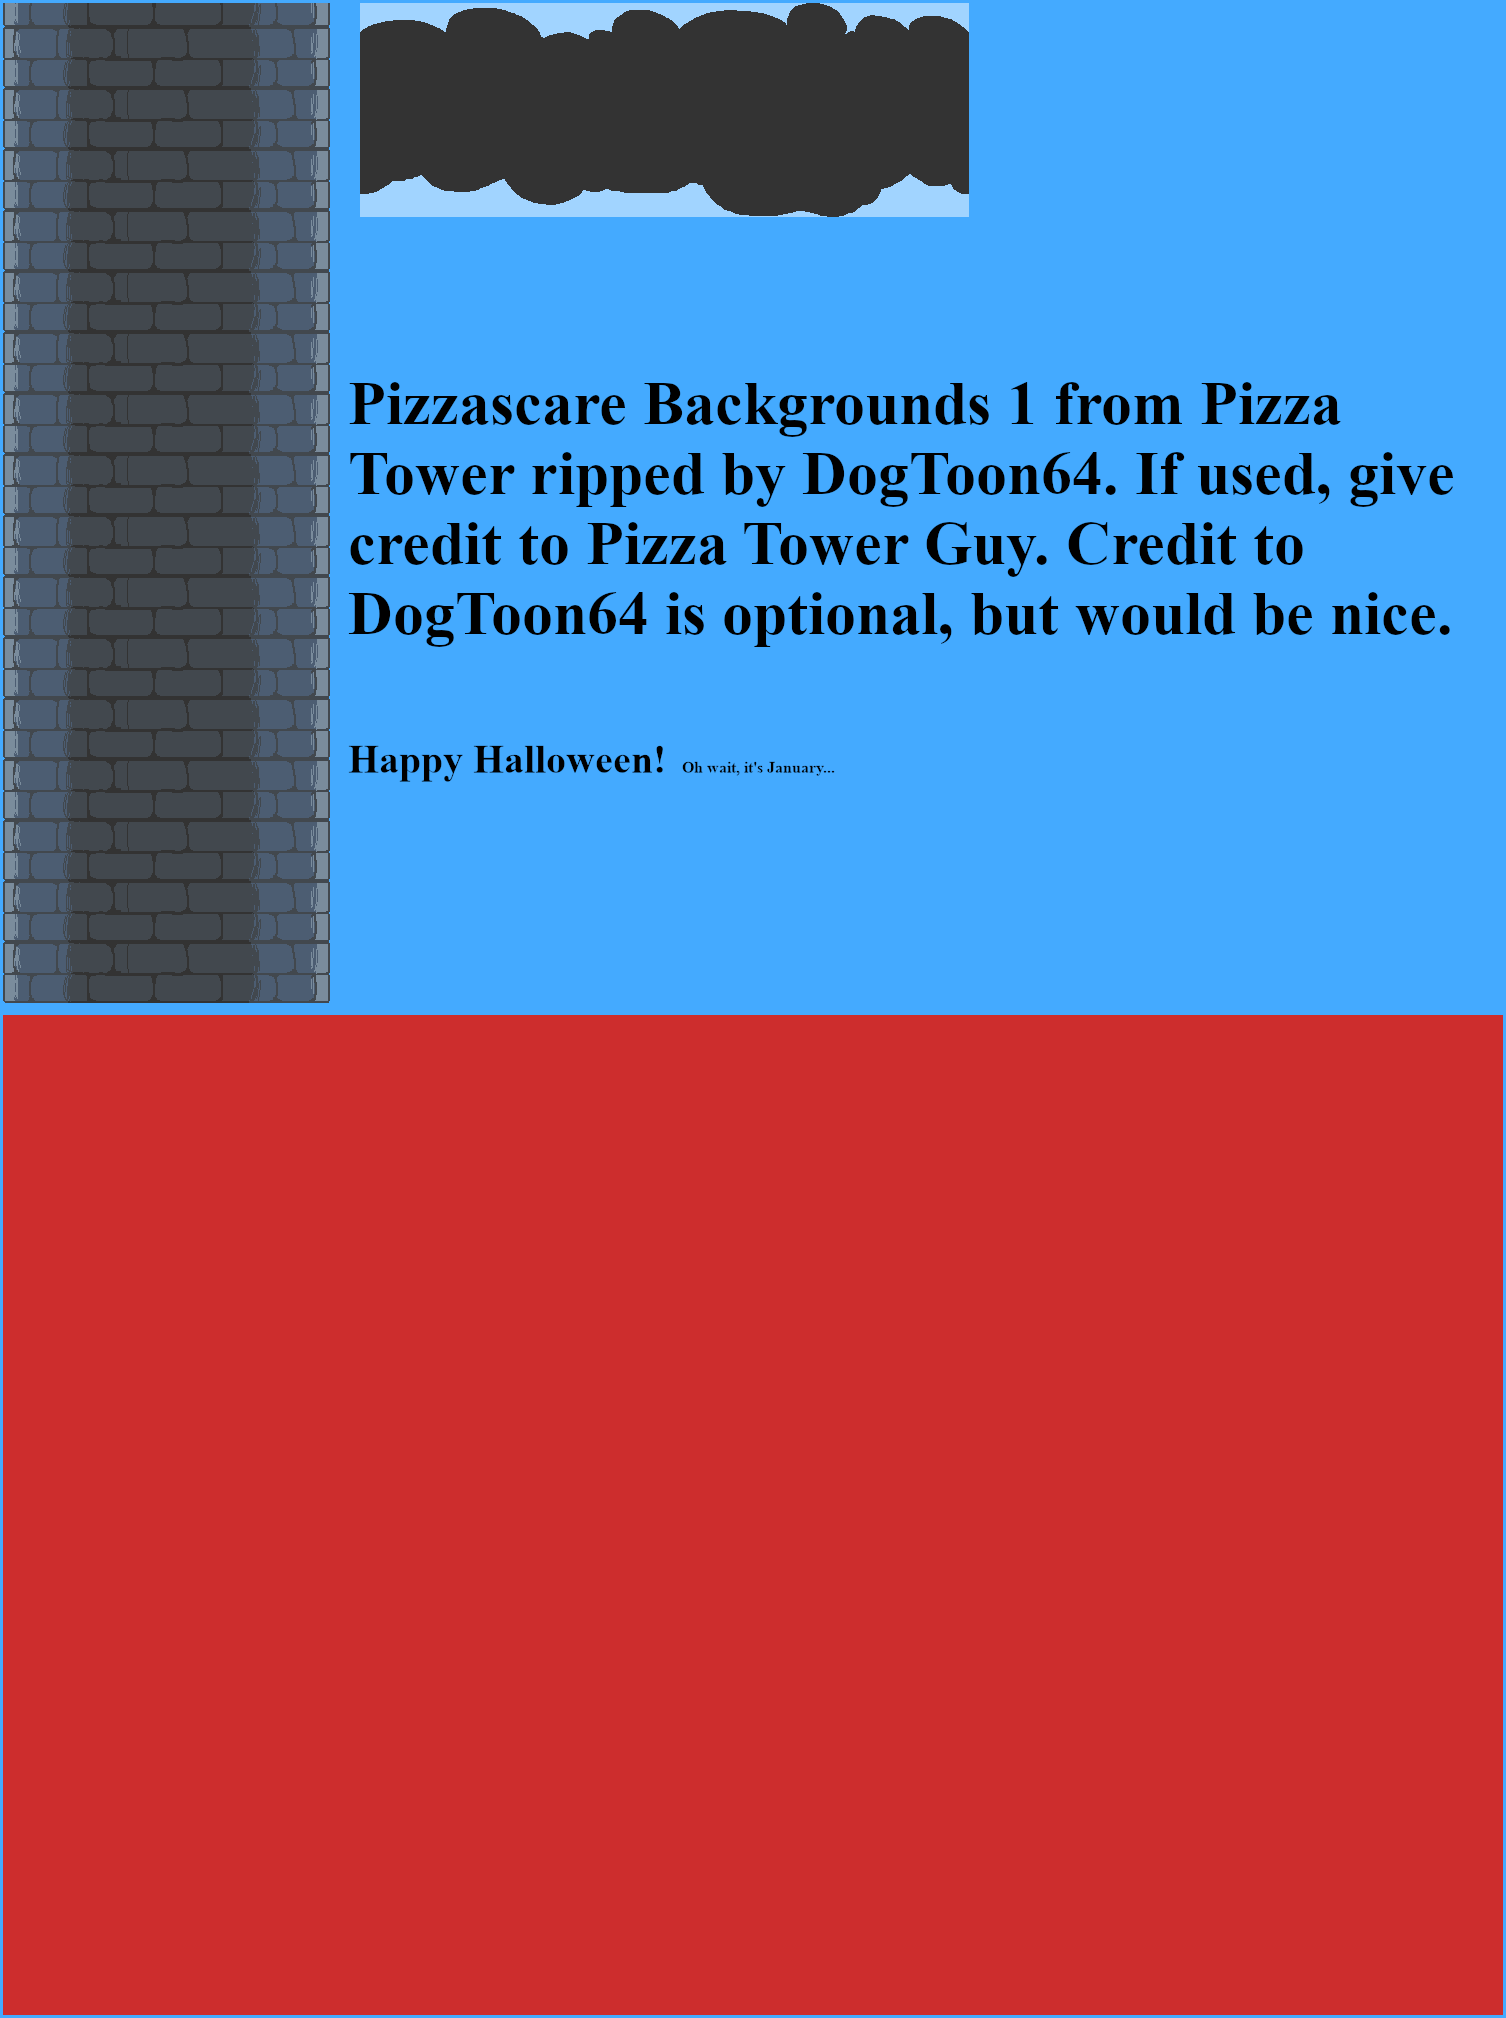 Pizzascare Backgrounds 1 (Demo)